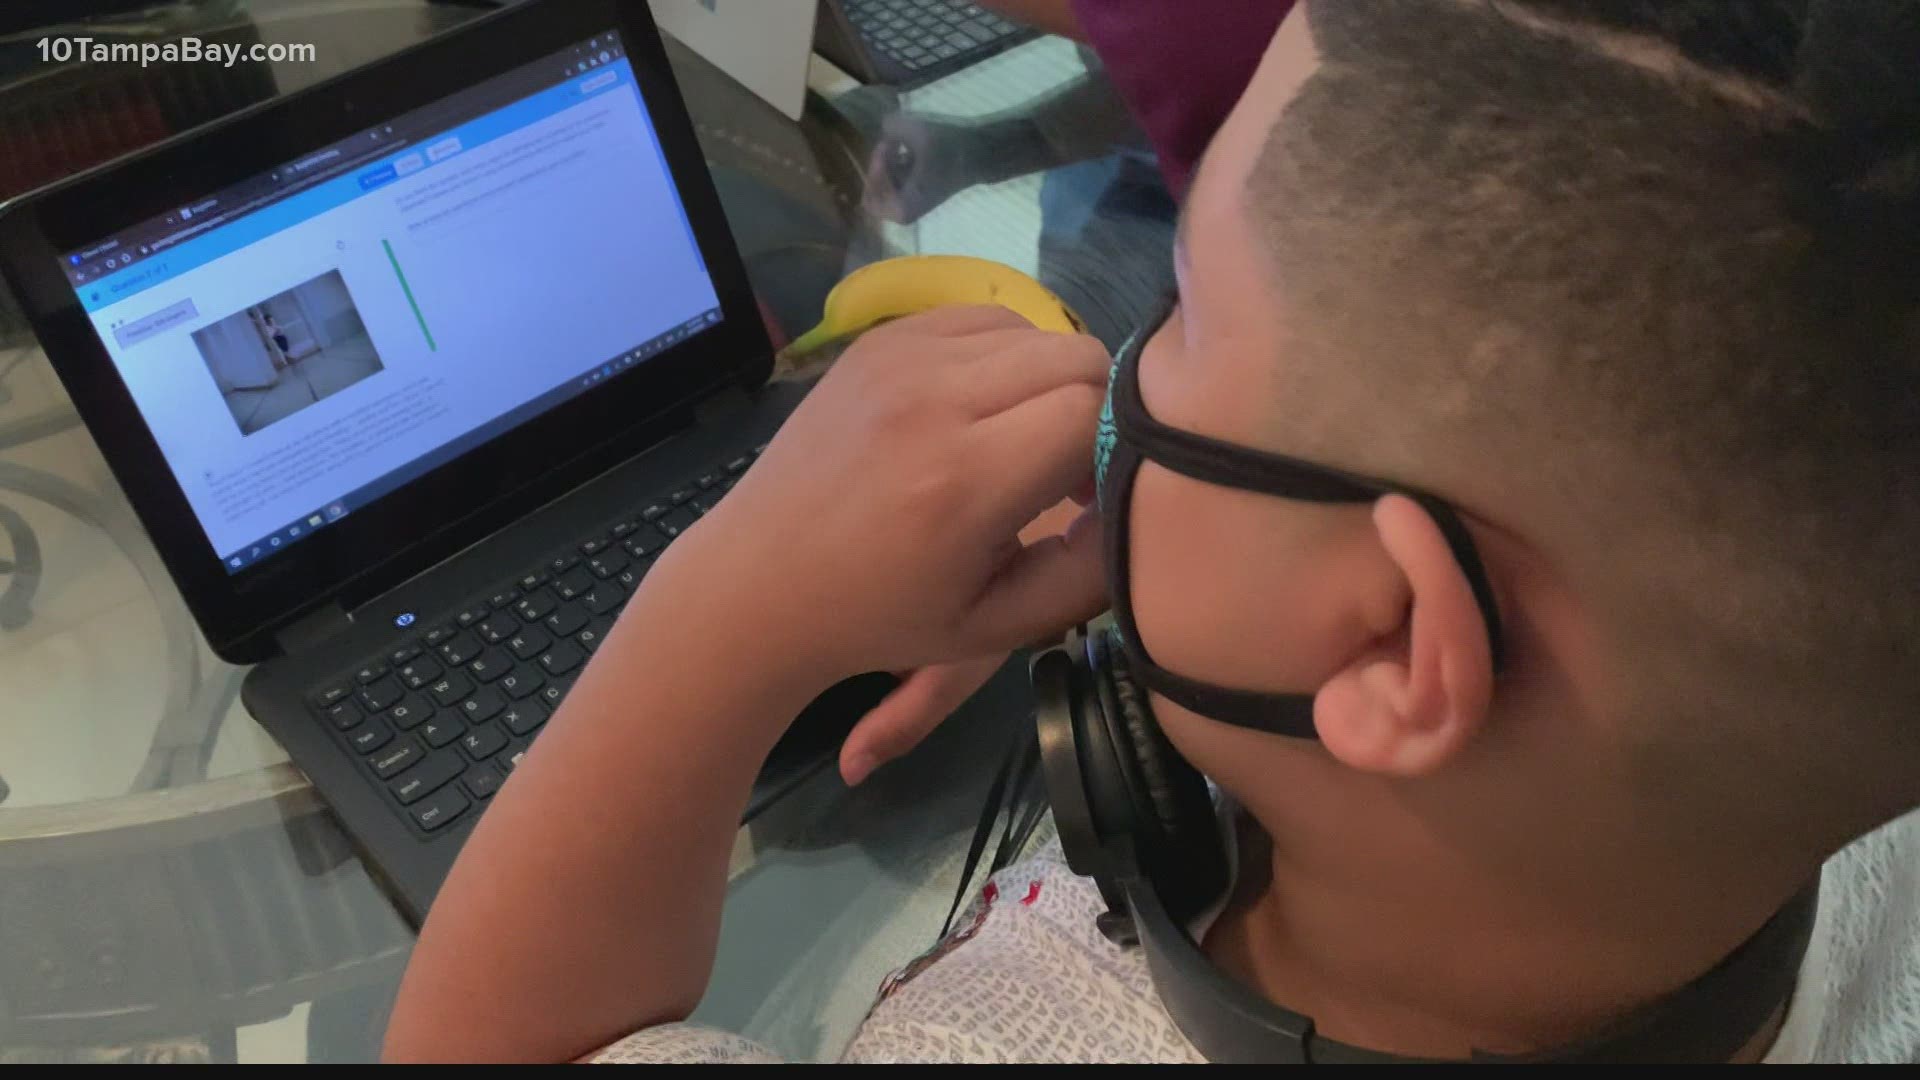 Through the Tech Connect program, students who are remote learning get Wi-Fi and a computer to help them stay on task.